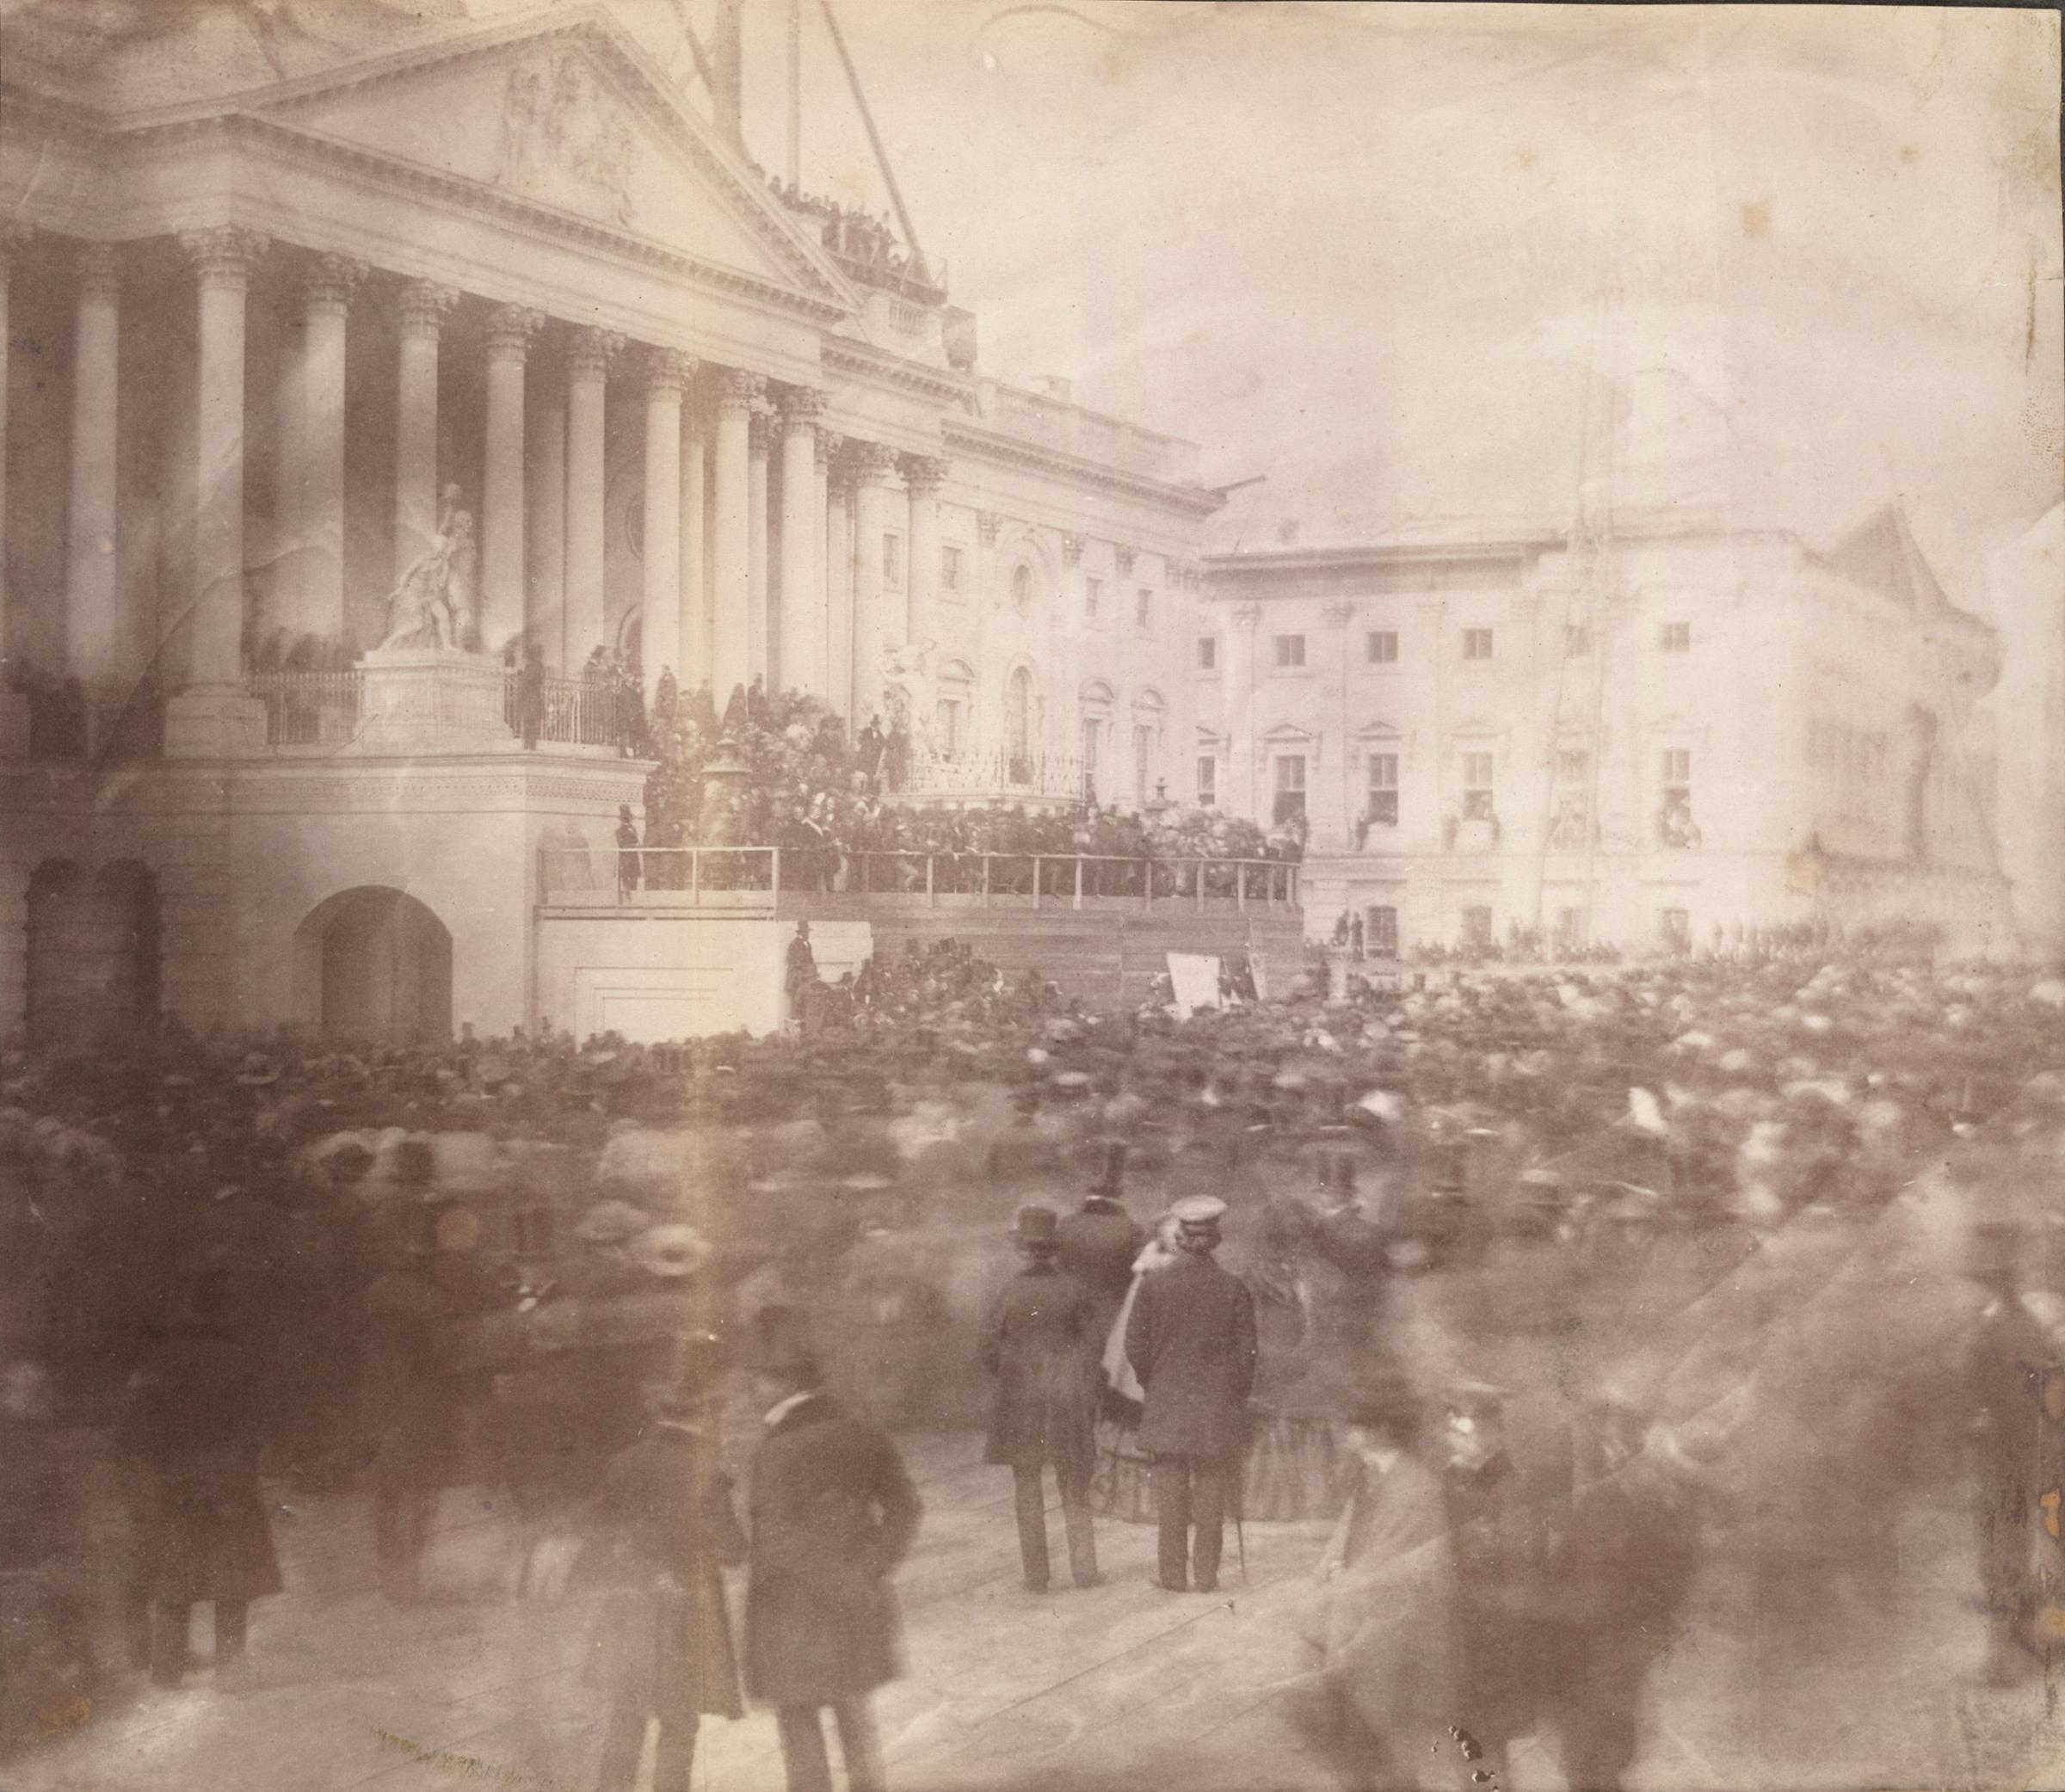 First photograph of an inaugration at the Capitol, James Buchanan, 1857.